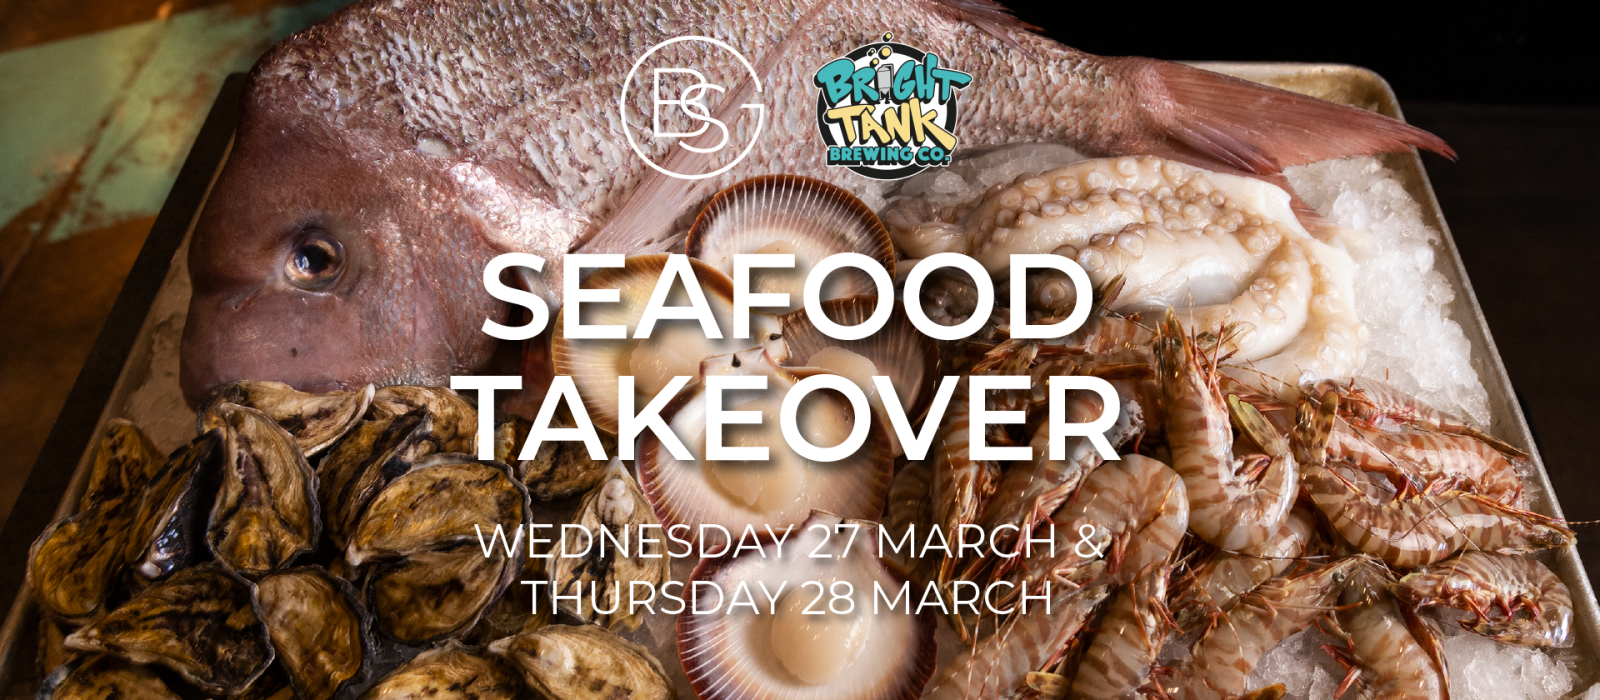 Seafood Takeover at Brown Street Grill